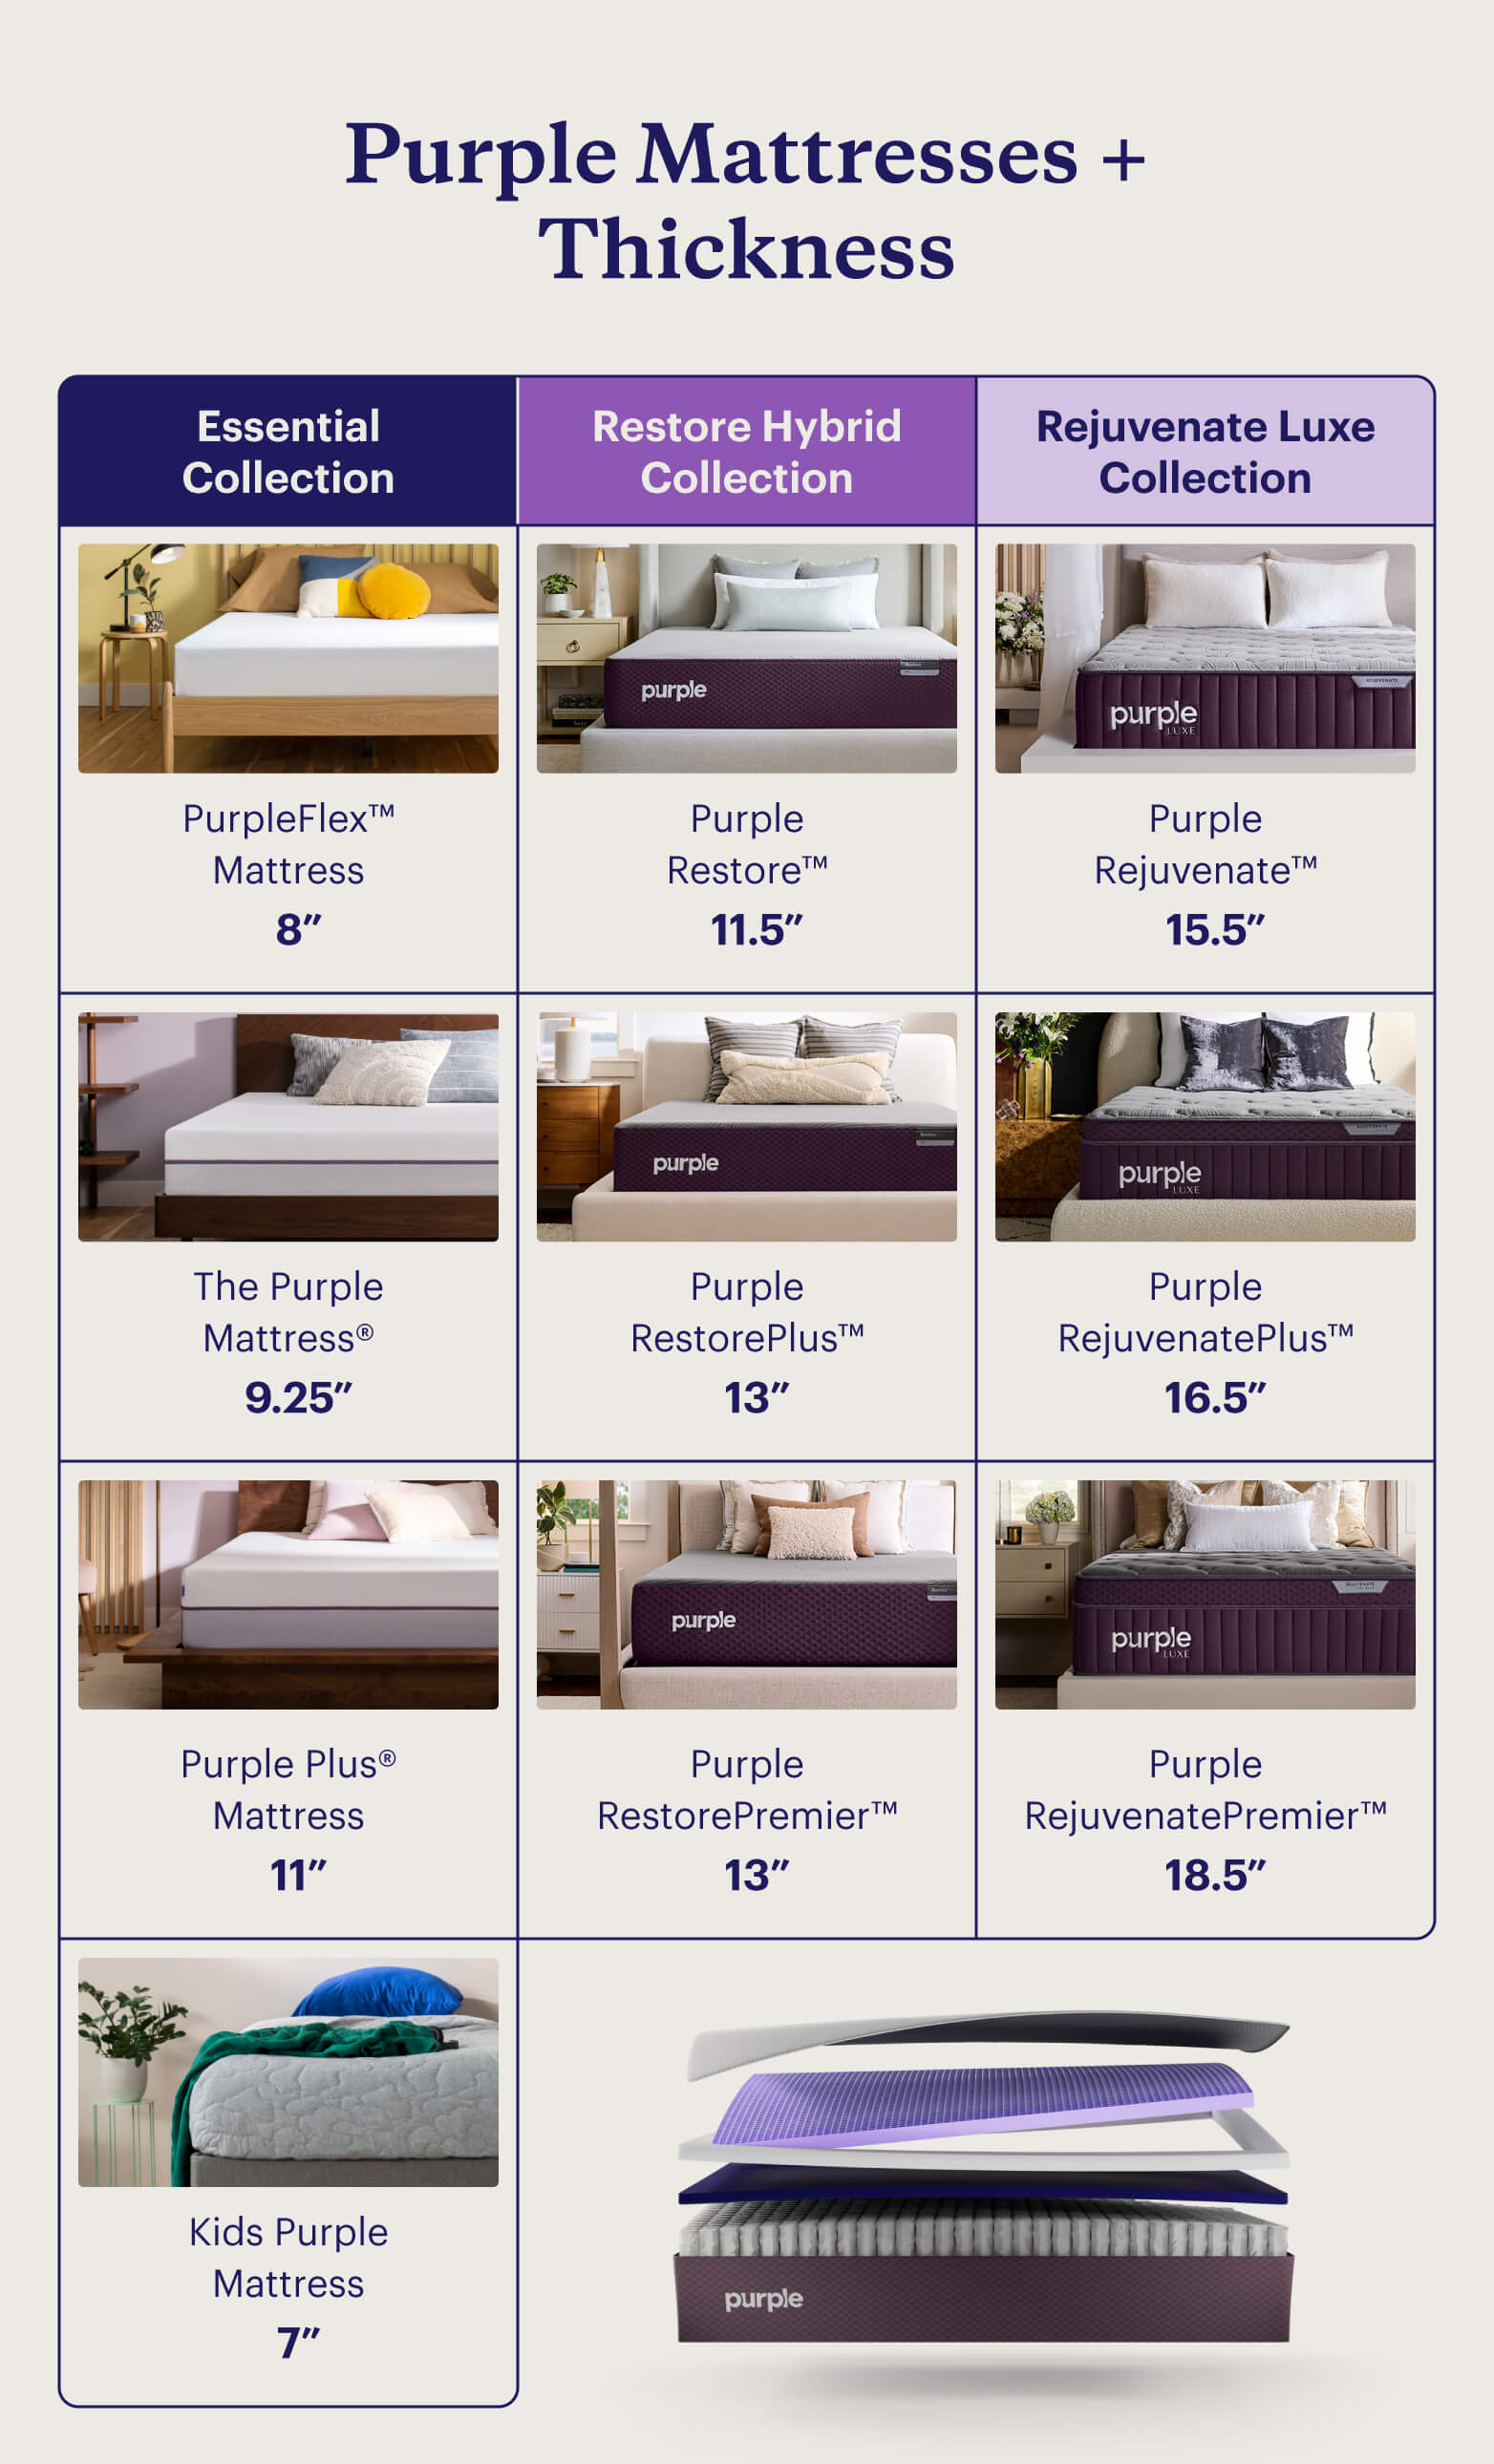 A chart of all Purple mattresses and their corresponding thickness.